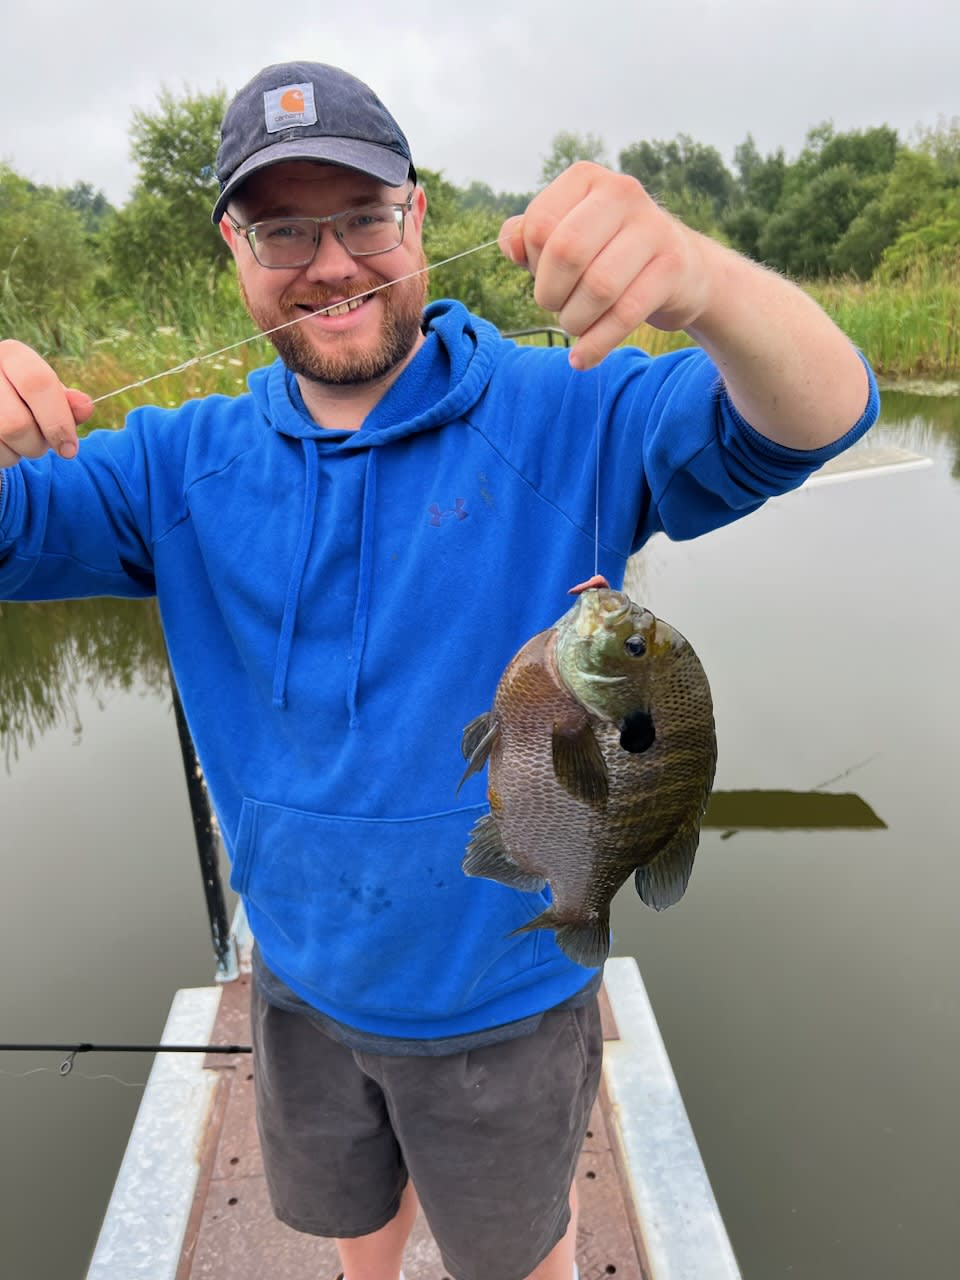 This Blue Gill has to be a record! Biggest I've ever seen, let alone caught!